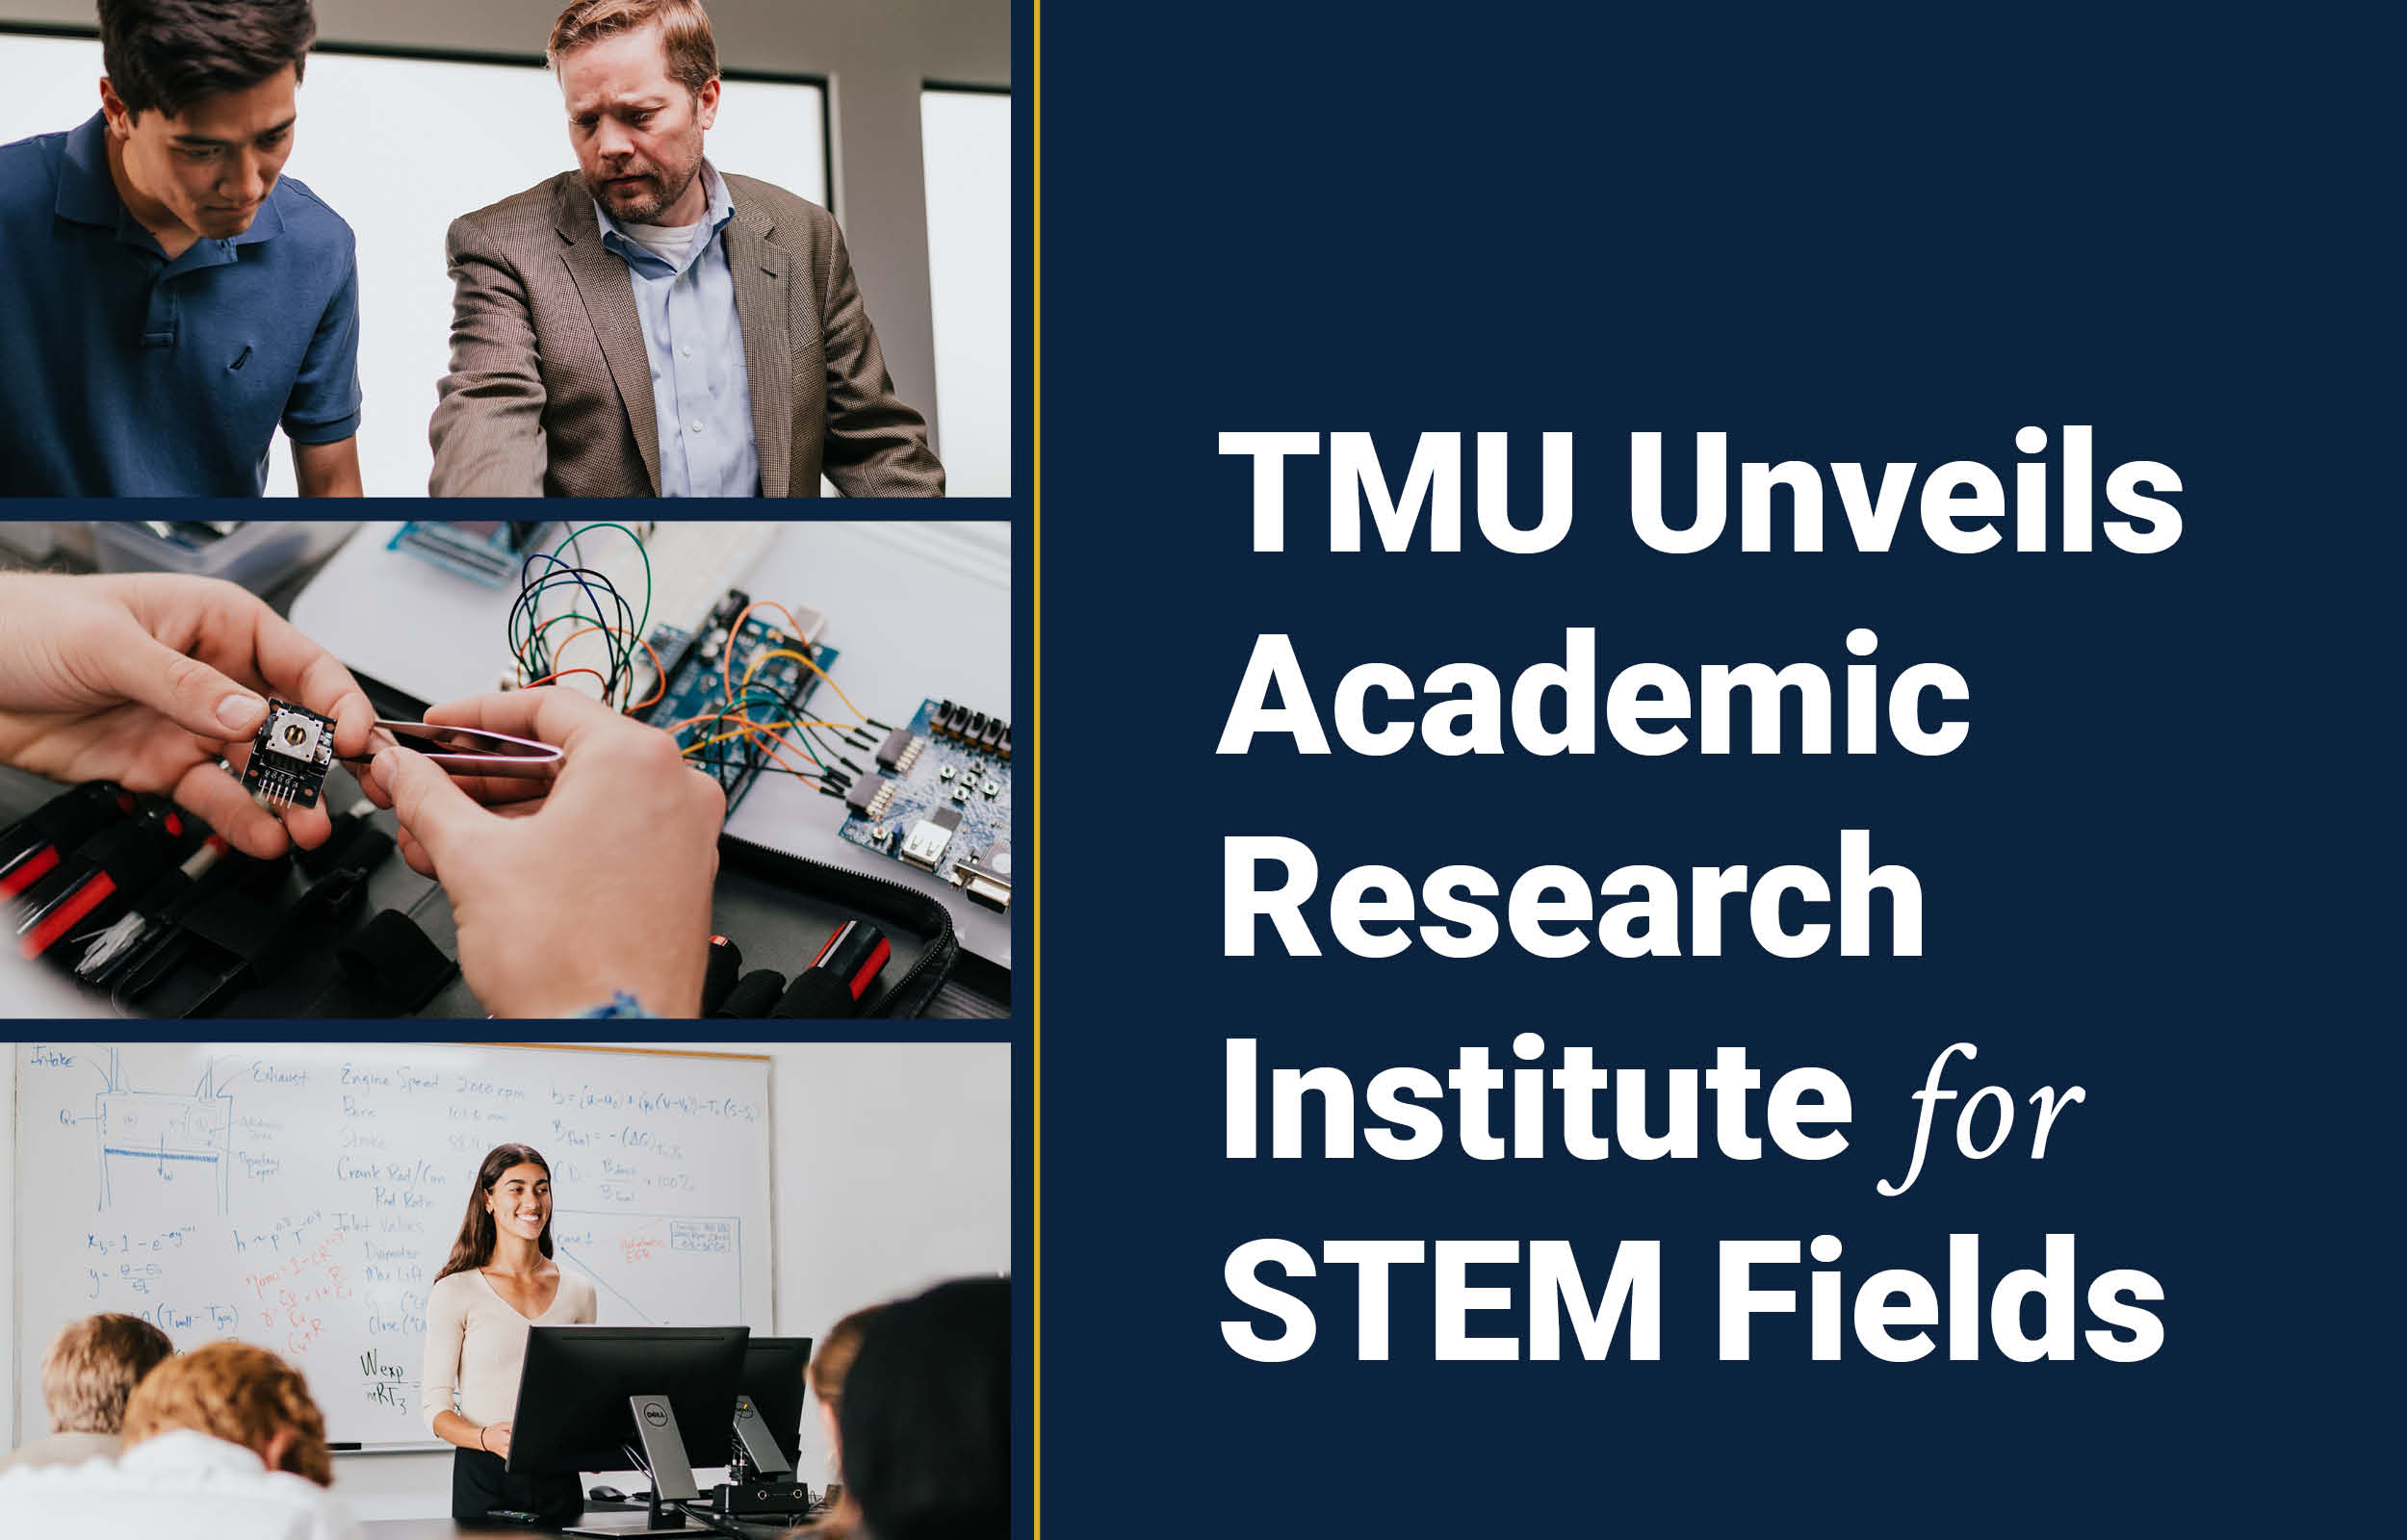 TMU Unveils Academic Research Institute for STEM Fields Featured Image